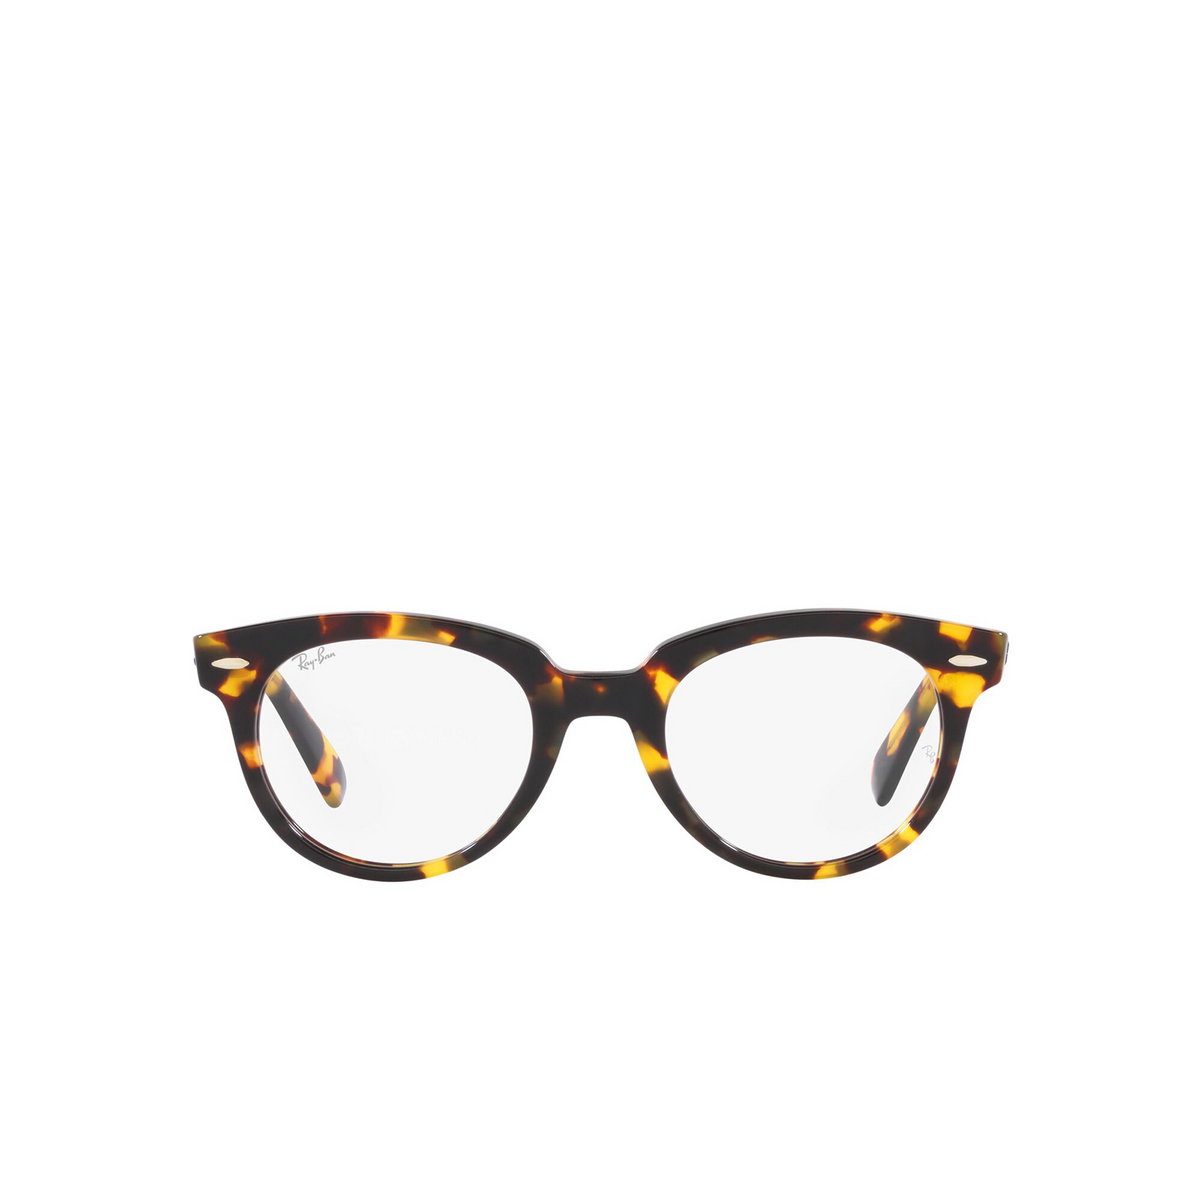 Ray-Ban® Round Eyeglasses: RX2199V color Yellow Havana 8116 - front view.